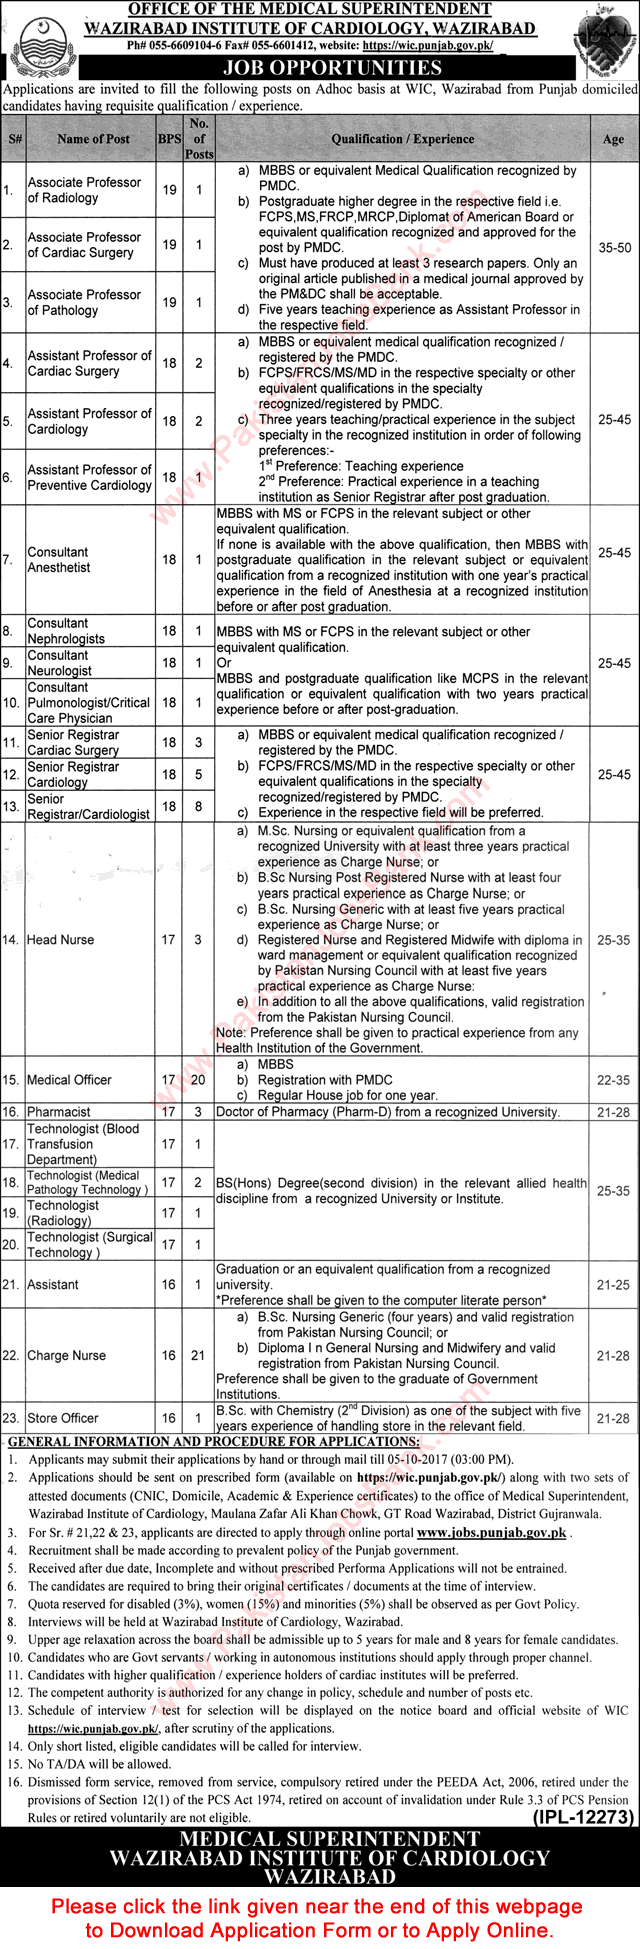 Wazirabad Institute of Cardiology Jobs September 2017 Online Application Form Medical Officers, Nurses & Others Latest